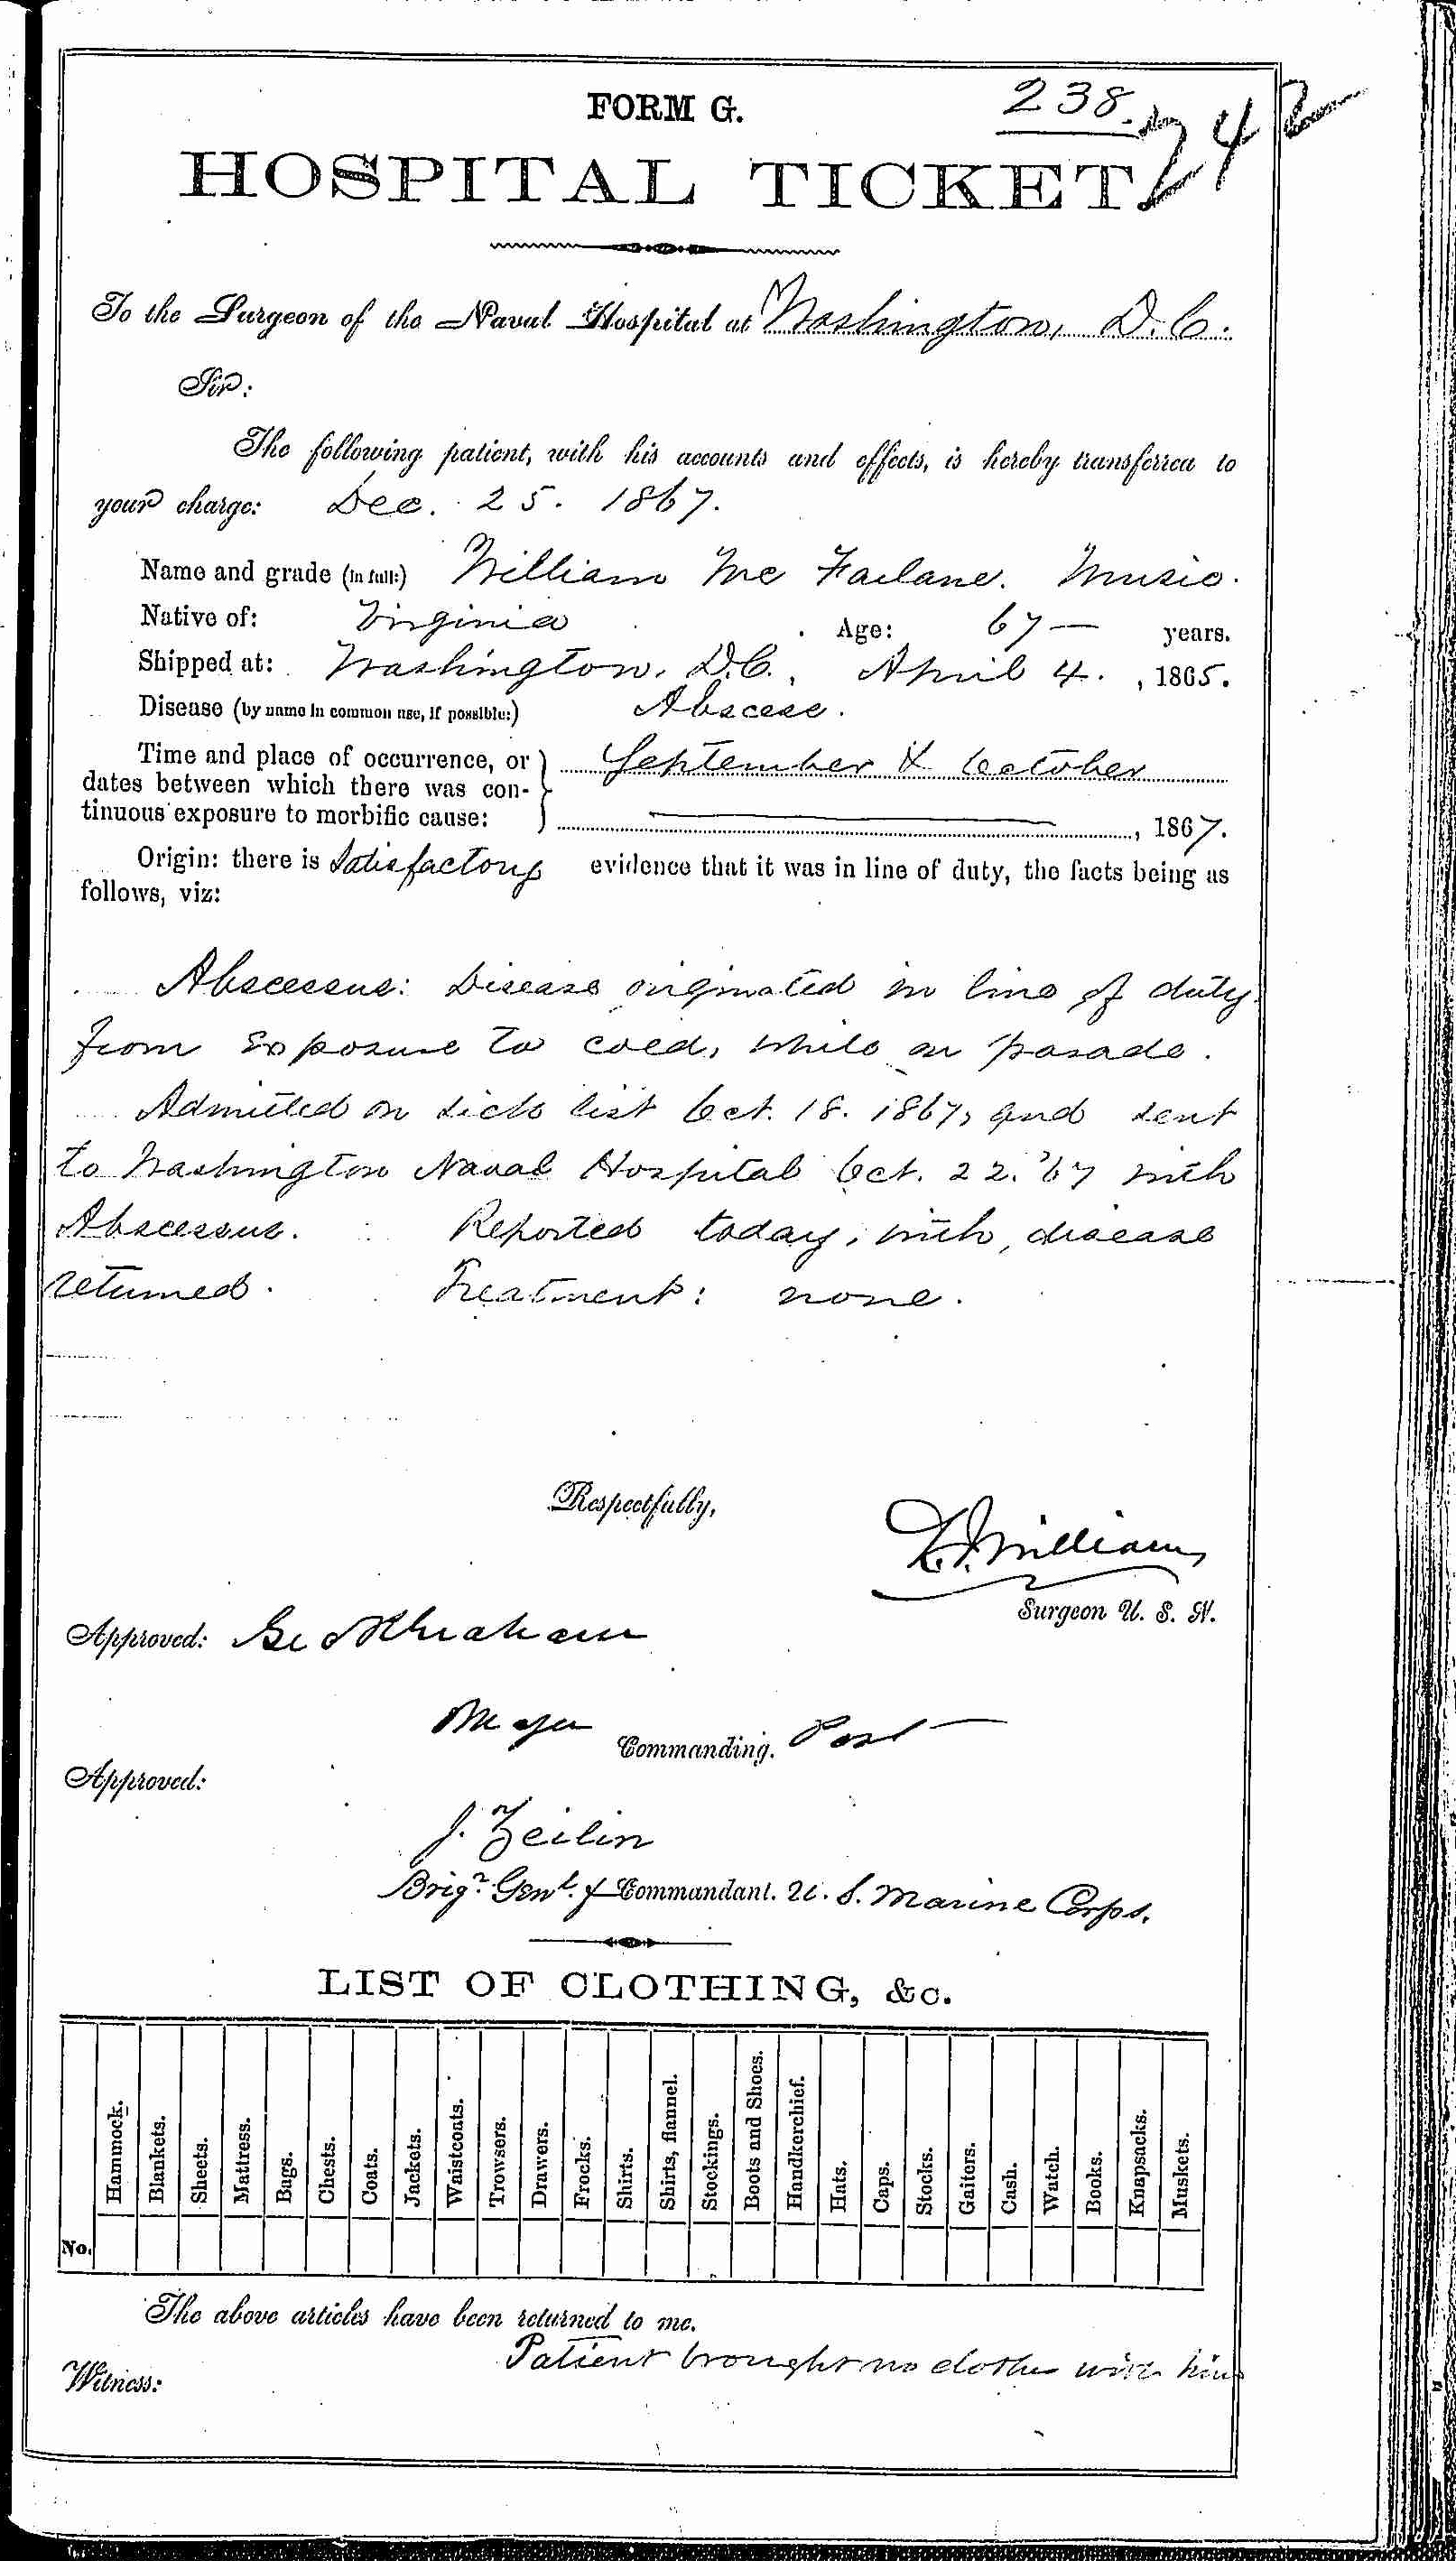 Entry for William McFarlane (second admission page 1 of 2) in the log Hospital Tickets and Case Papers - Naval Hospital - Washington, D.C. - 1866-68